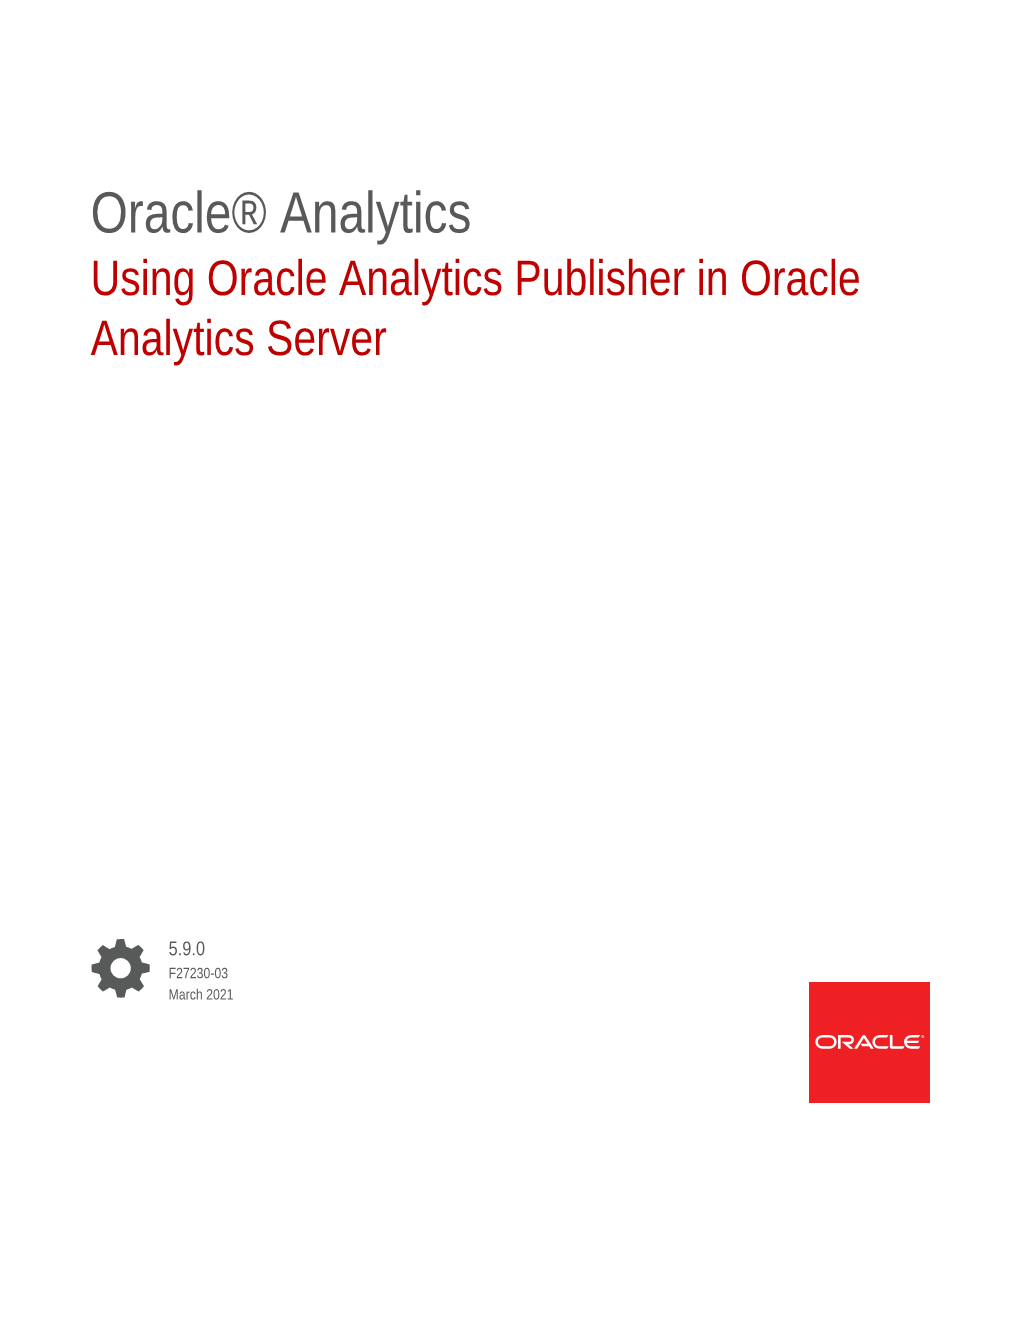 Using Oracle Analytics Publisher in Oracle Analytics Server